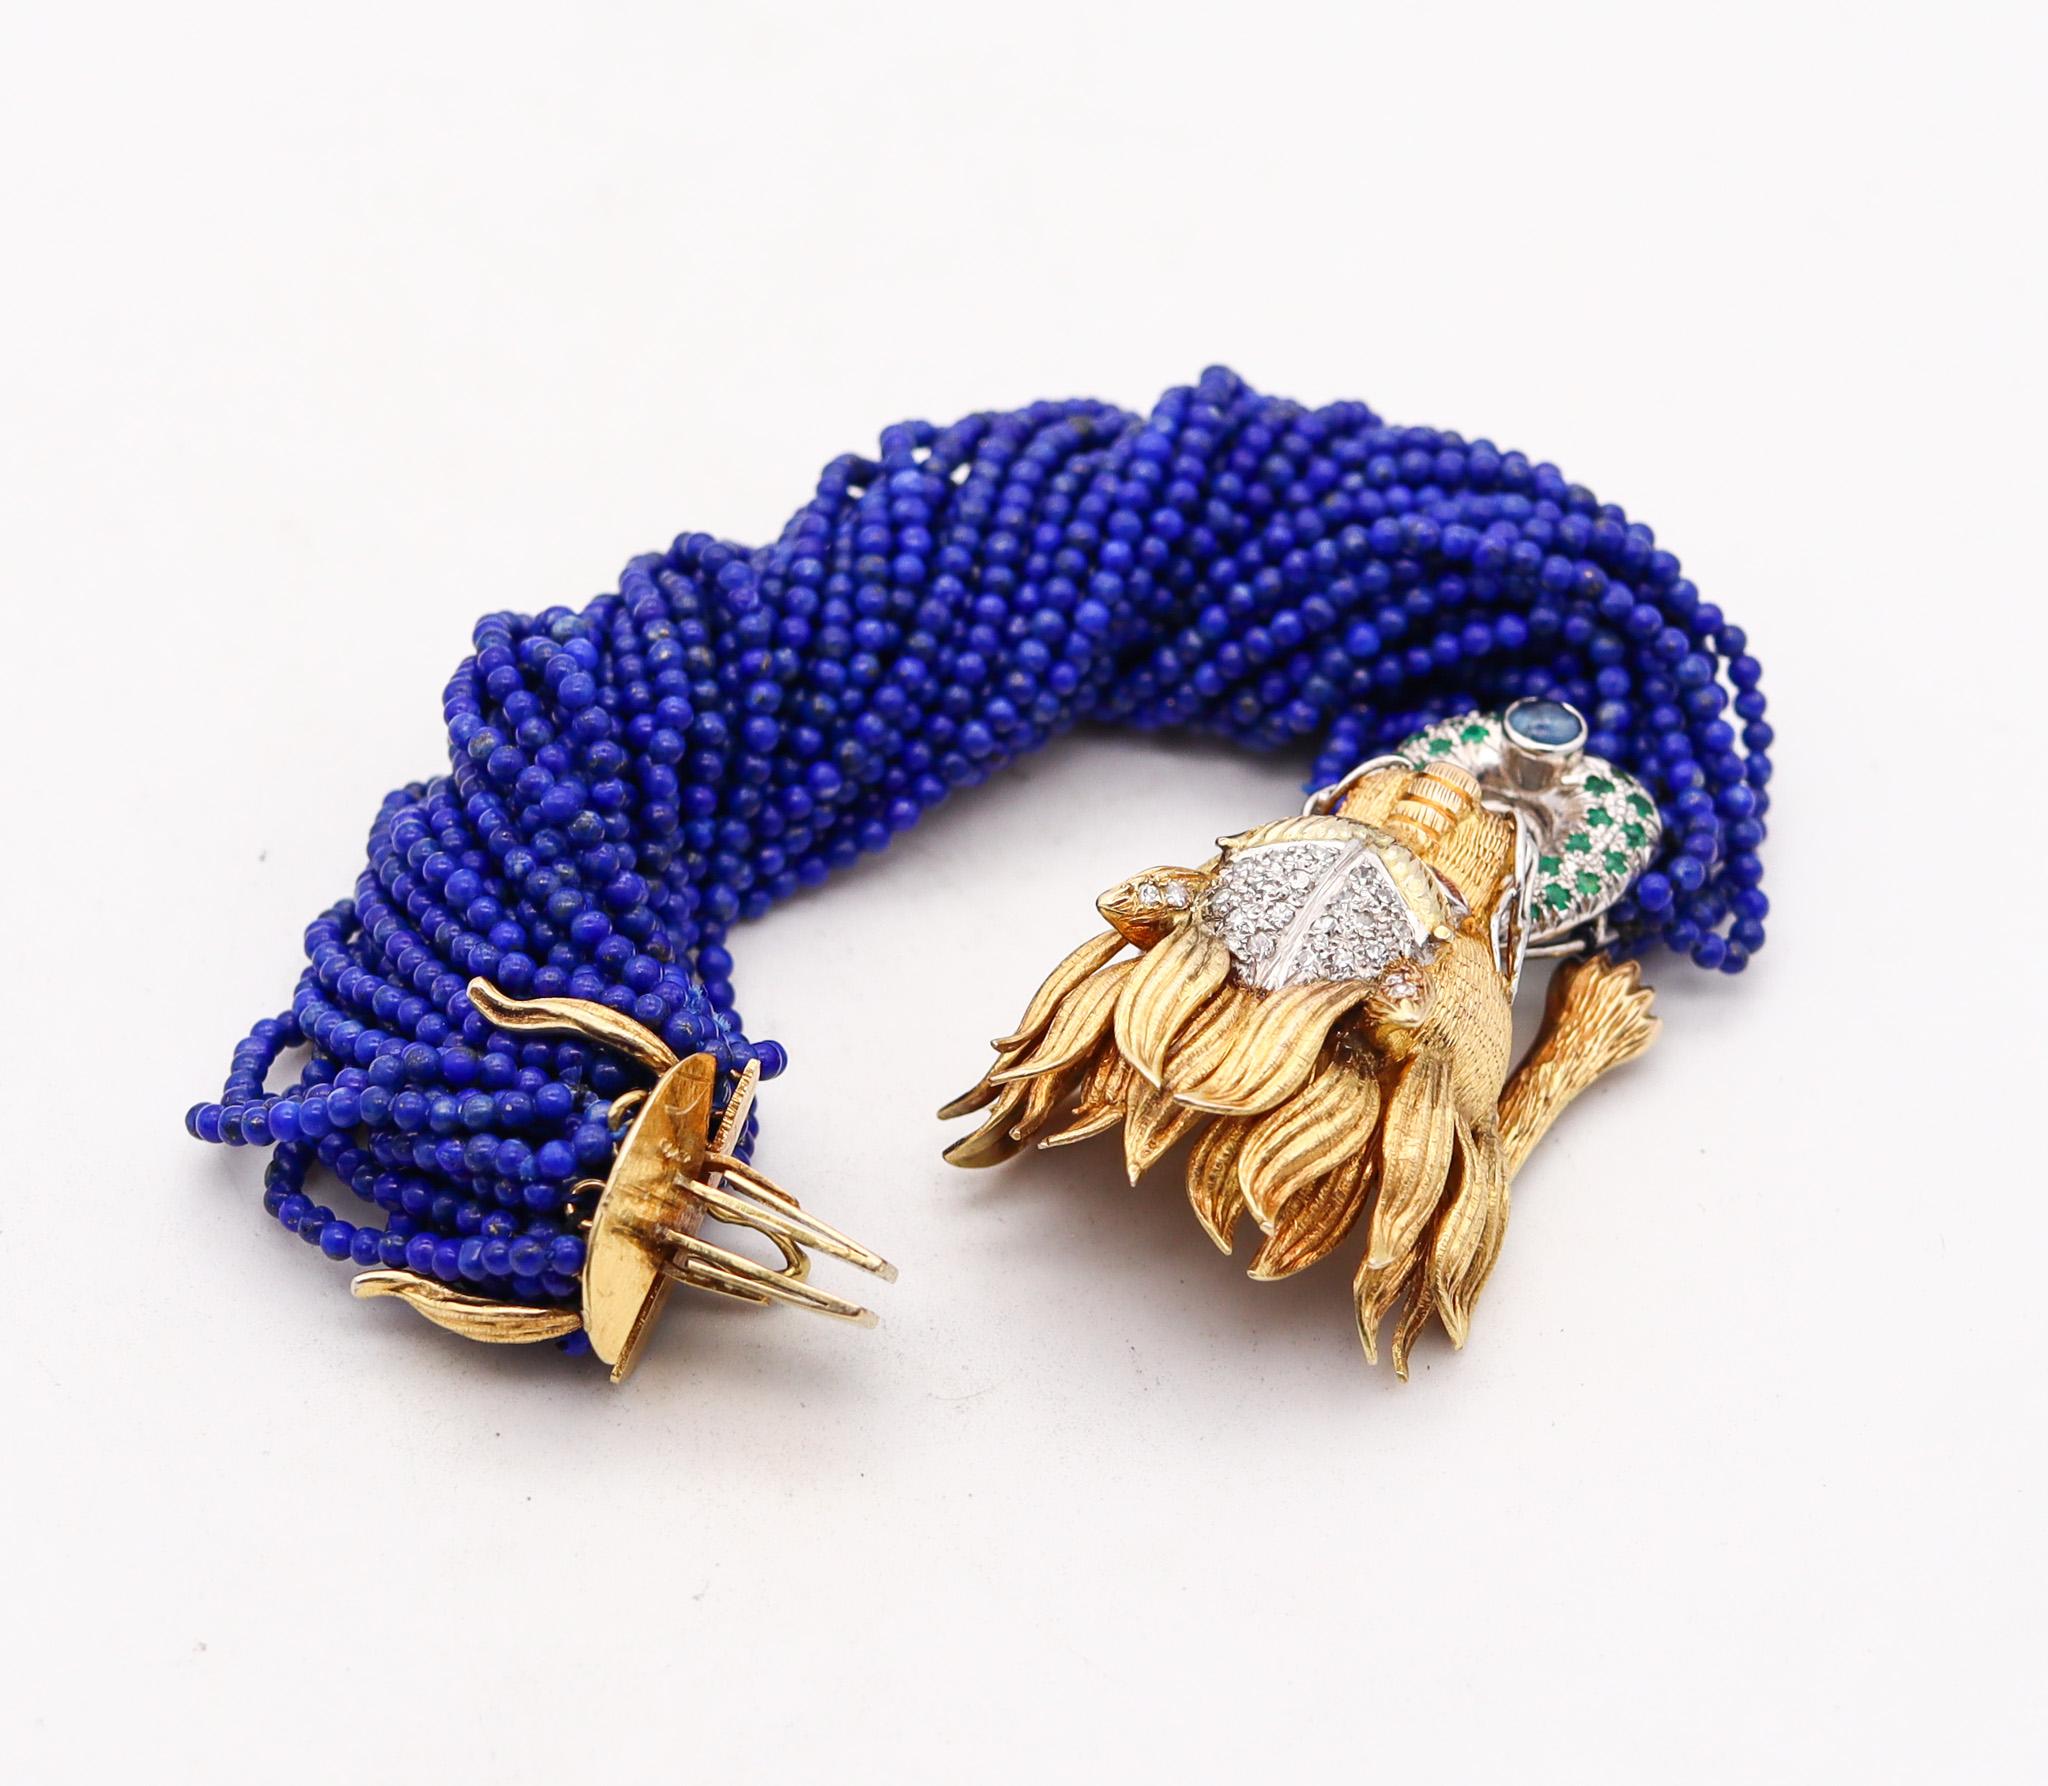 Brilliant Cut Chinoiserie Lapis Bracelet In 18Kt Gold With 2.17 Ctw Diamonds Emeralds & Rubies